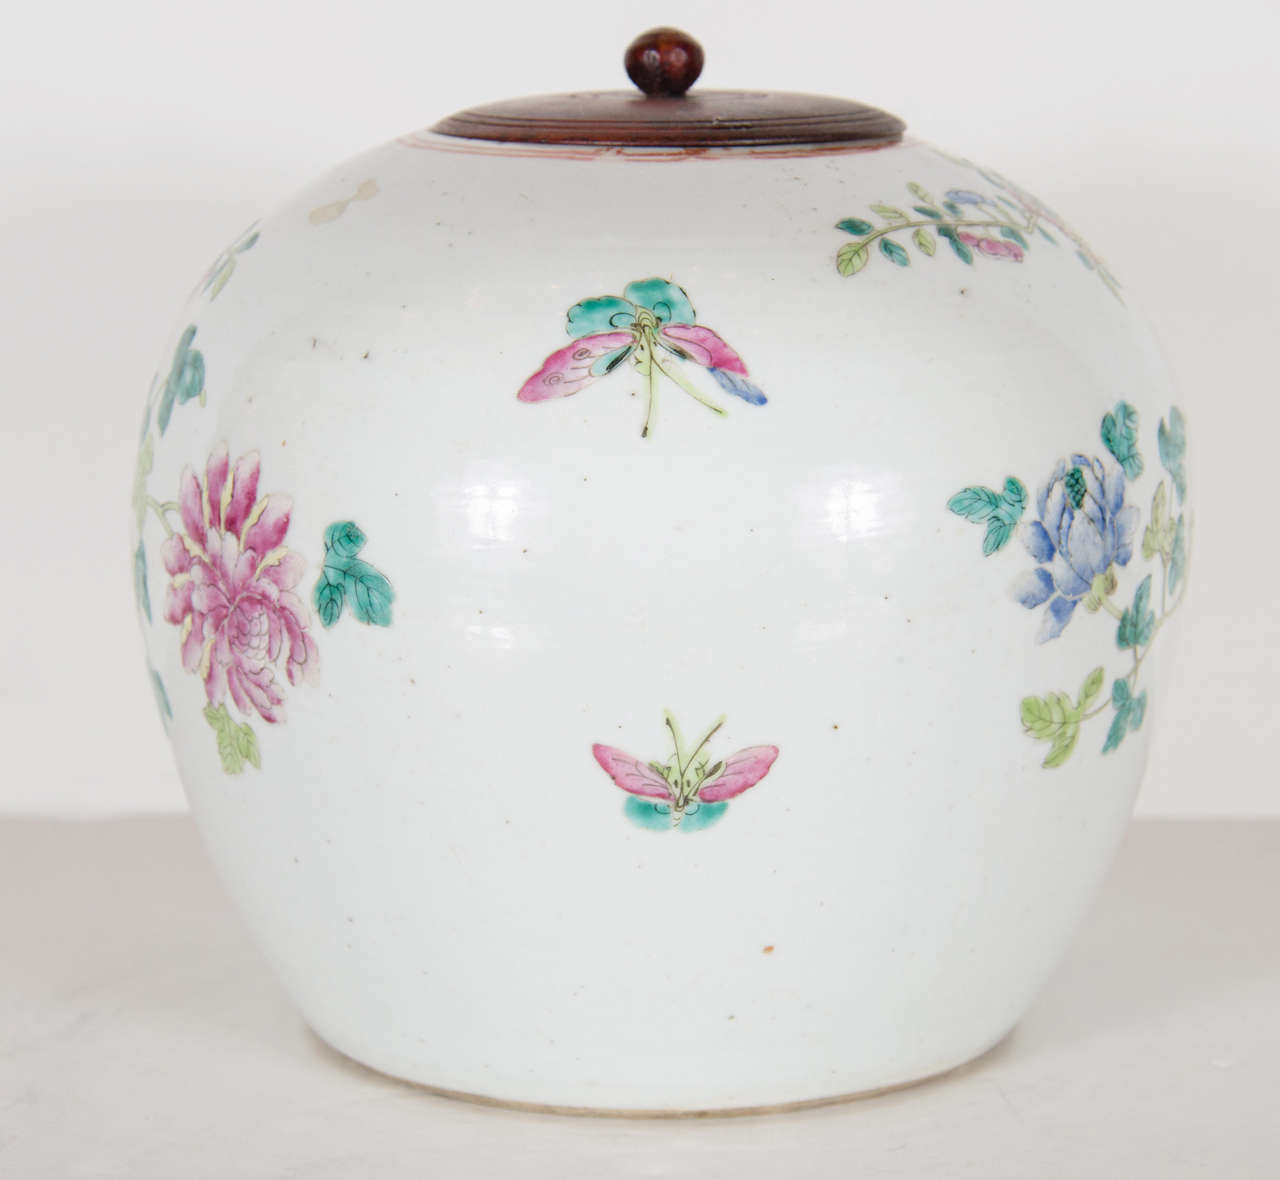 This exquisite urn features a covered wooden top with extensive hand painted exotic peacock with stunning plumage and floral and fauna decoration in colors of celadon, rose, cornflower blue, cerulean, peridot on a creme background.